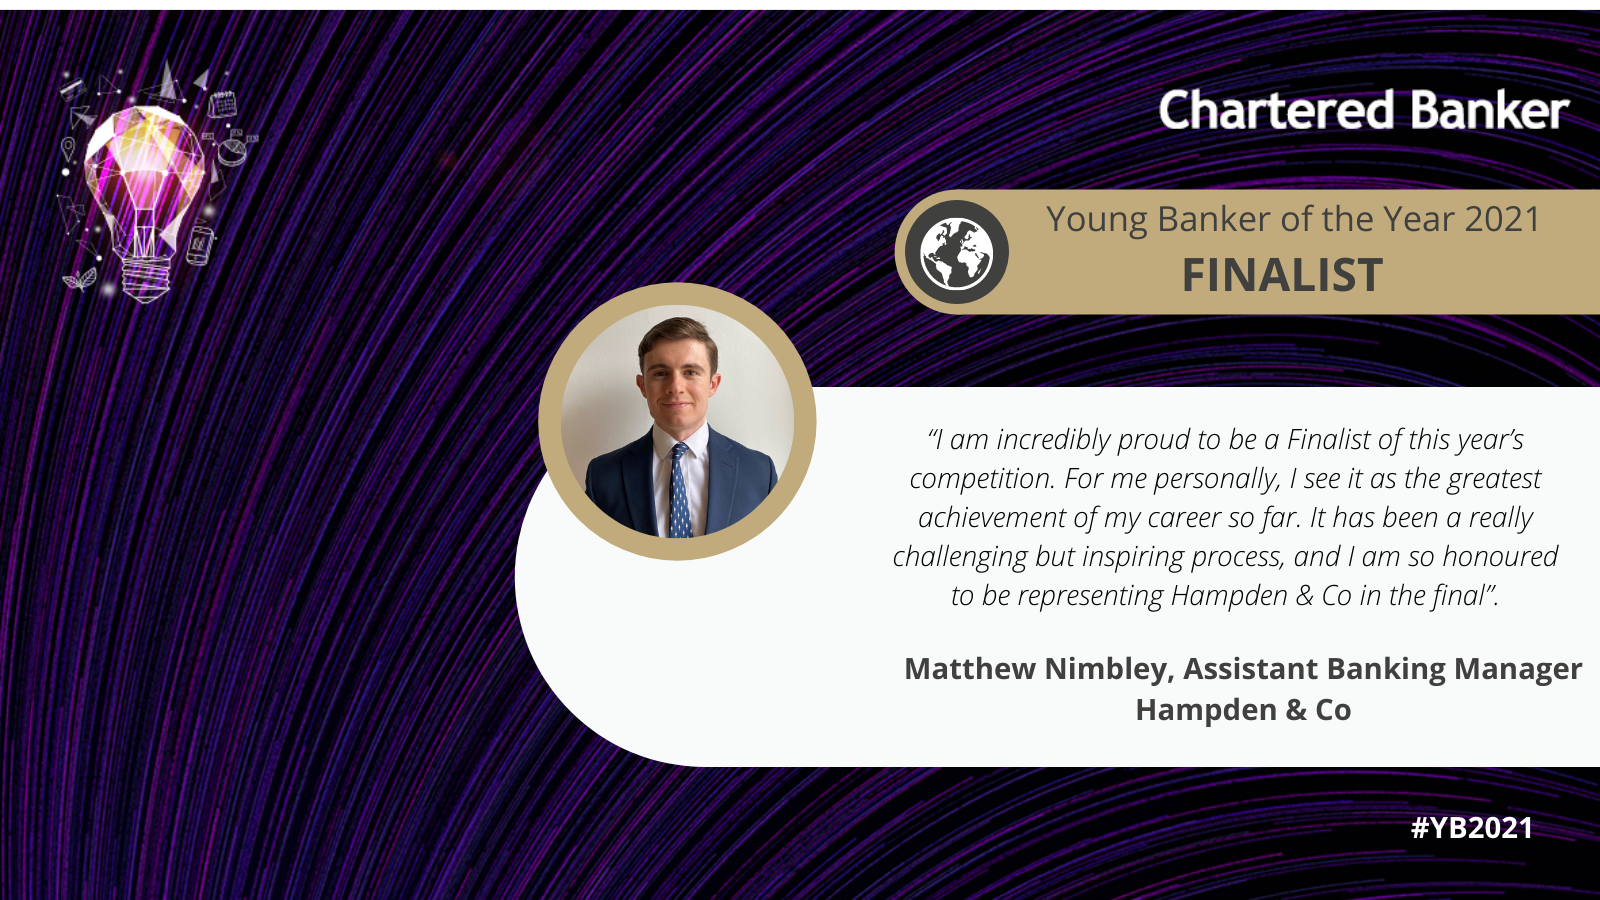 Young Banker of the Year 2021 - Matthew Nimbley's Proposal